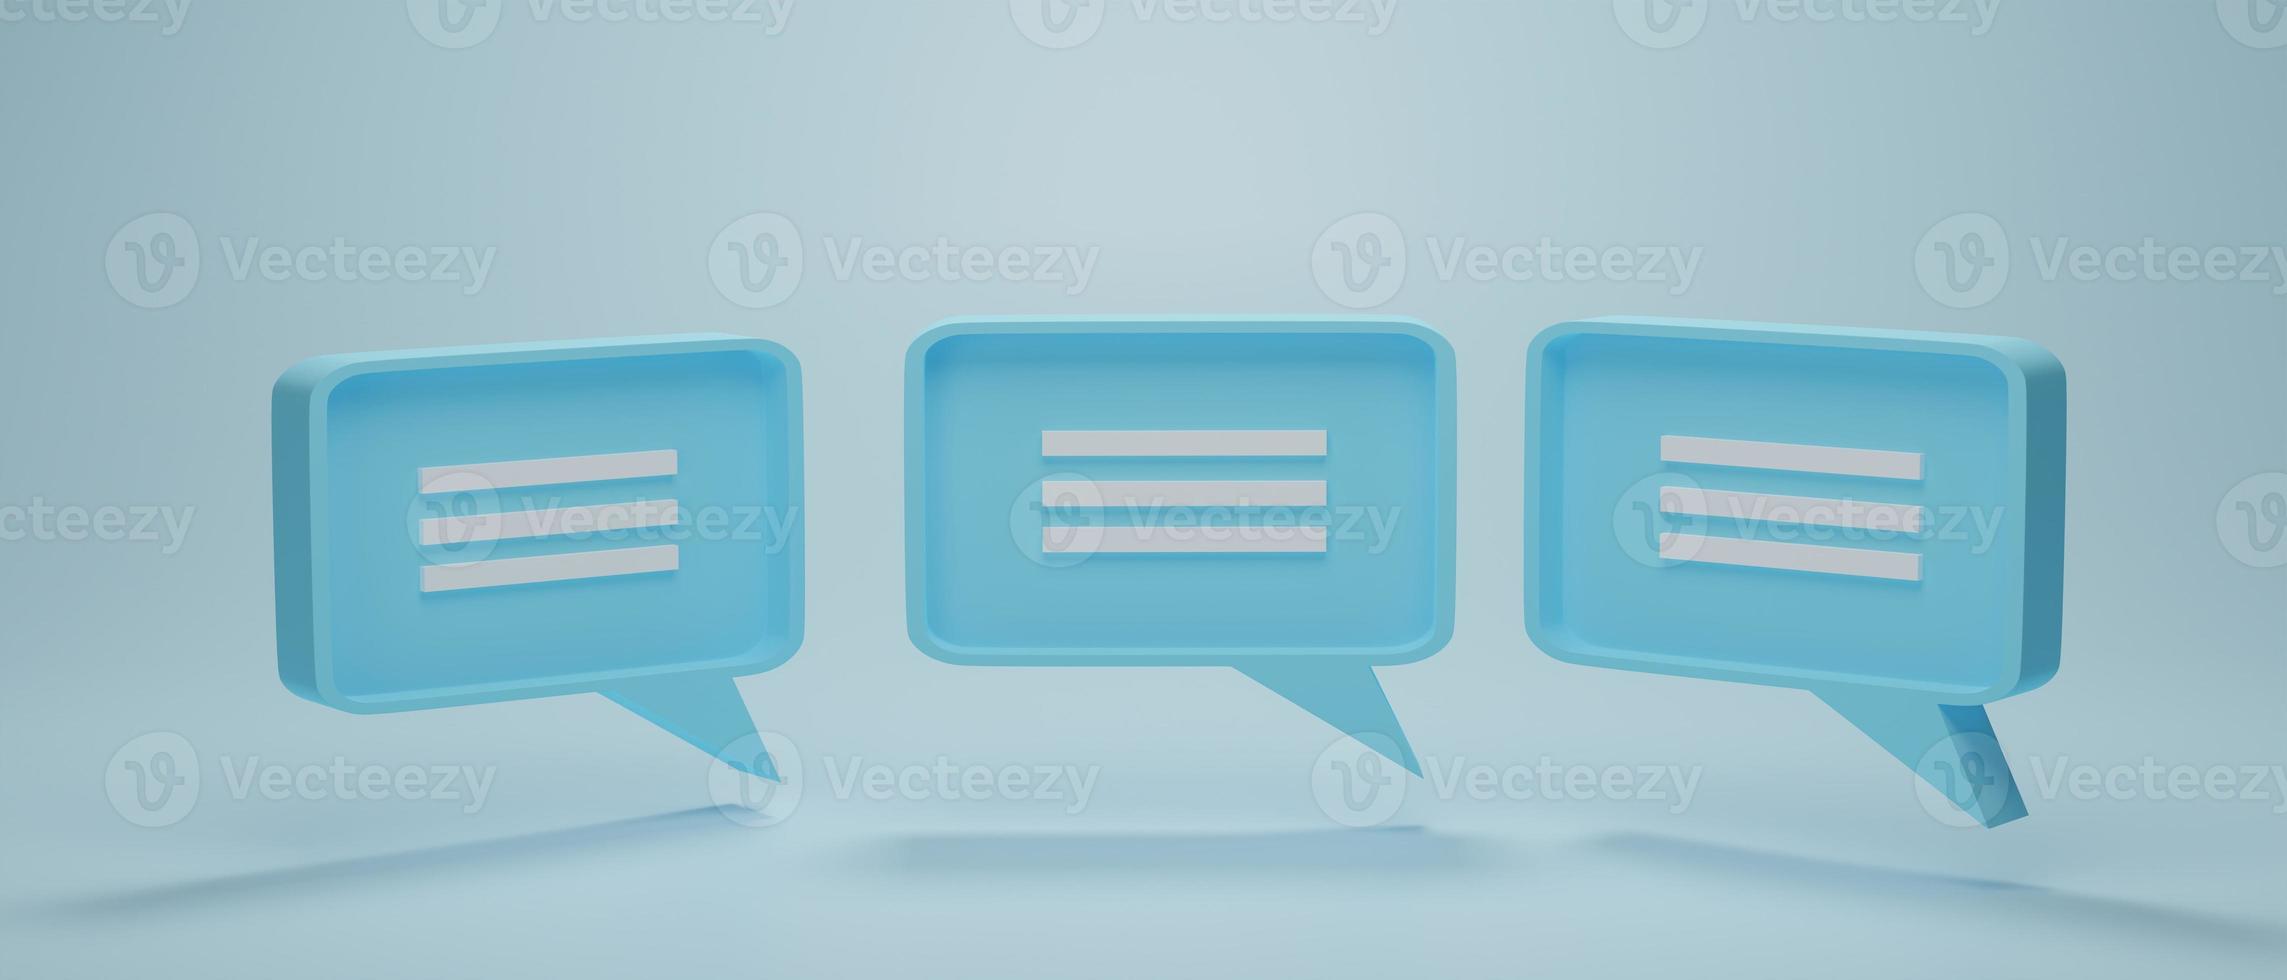 Set of 3 chat bubble icon or speech bubbles symbol on blue pastel background. Concept of chat, communication or dialogue. 3d rendering illustration. photo